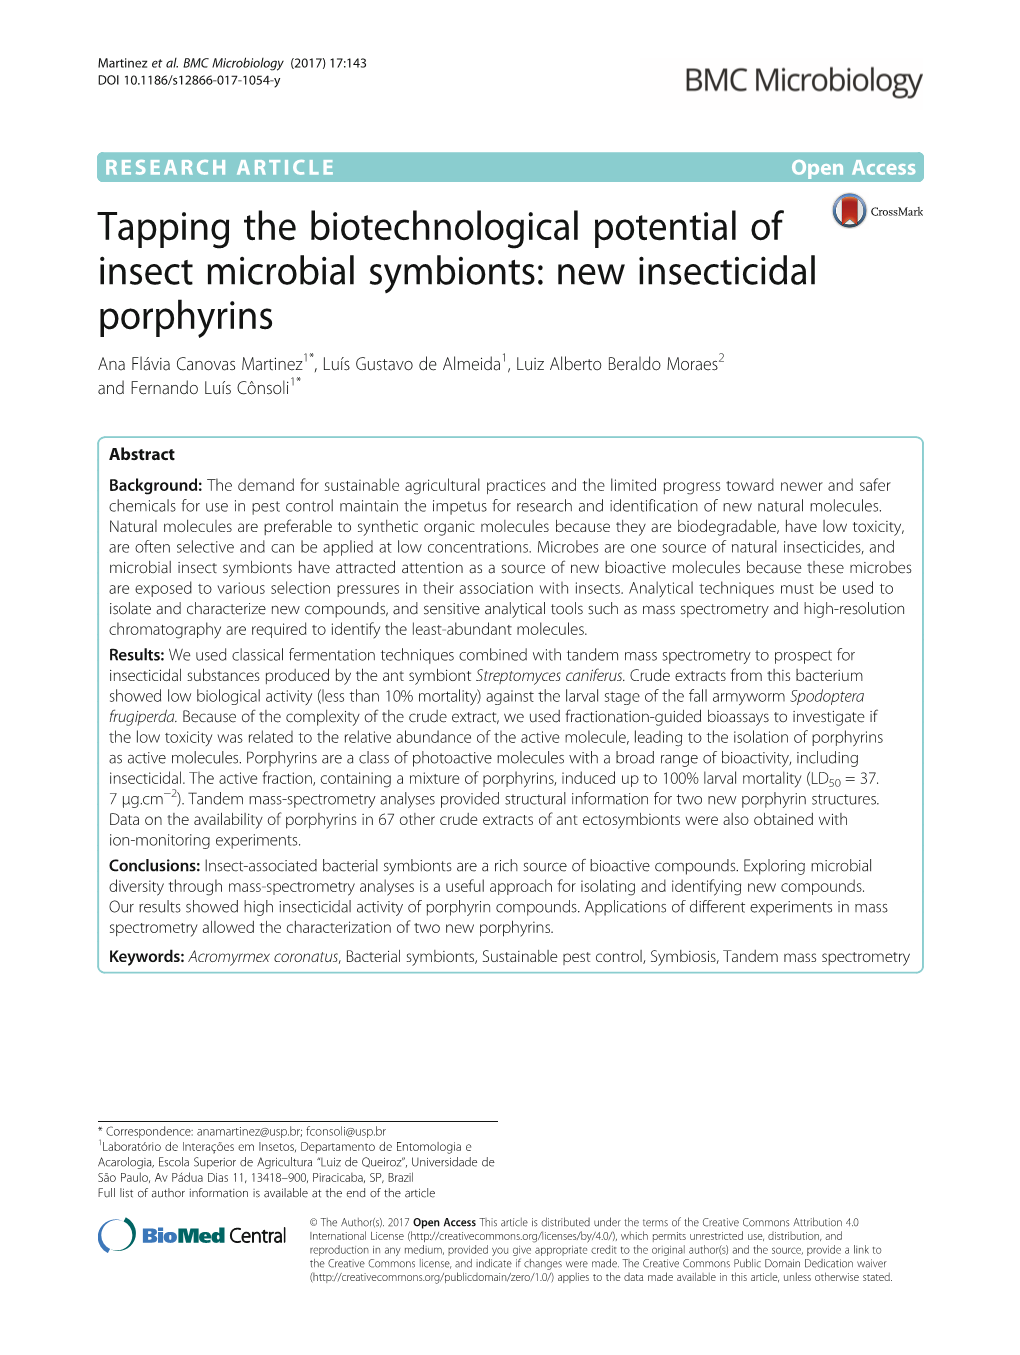 Tapping the Biotechnological Potential of Insect Microbial Symbionts: New